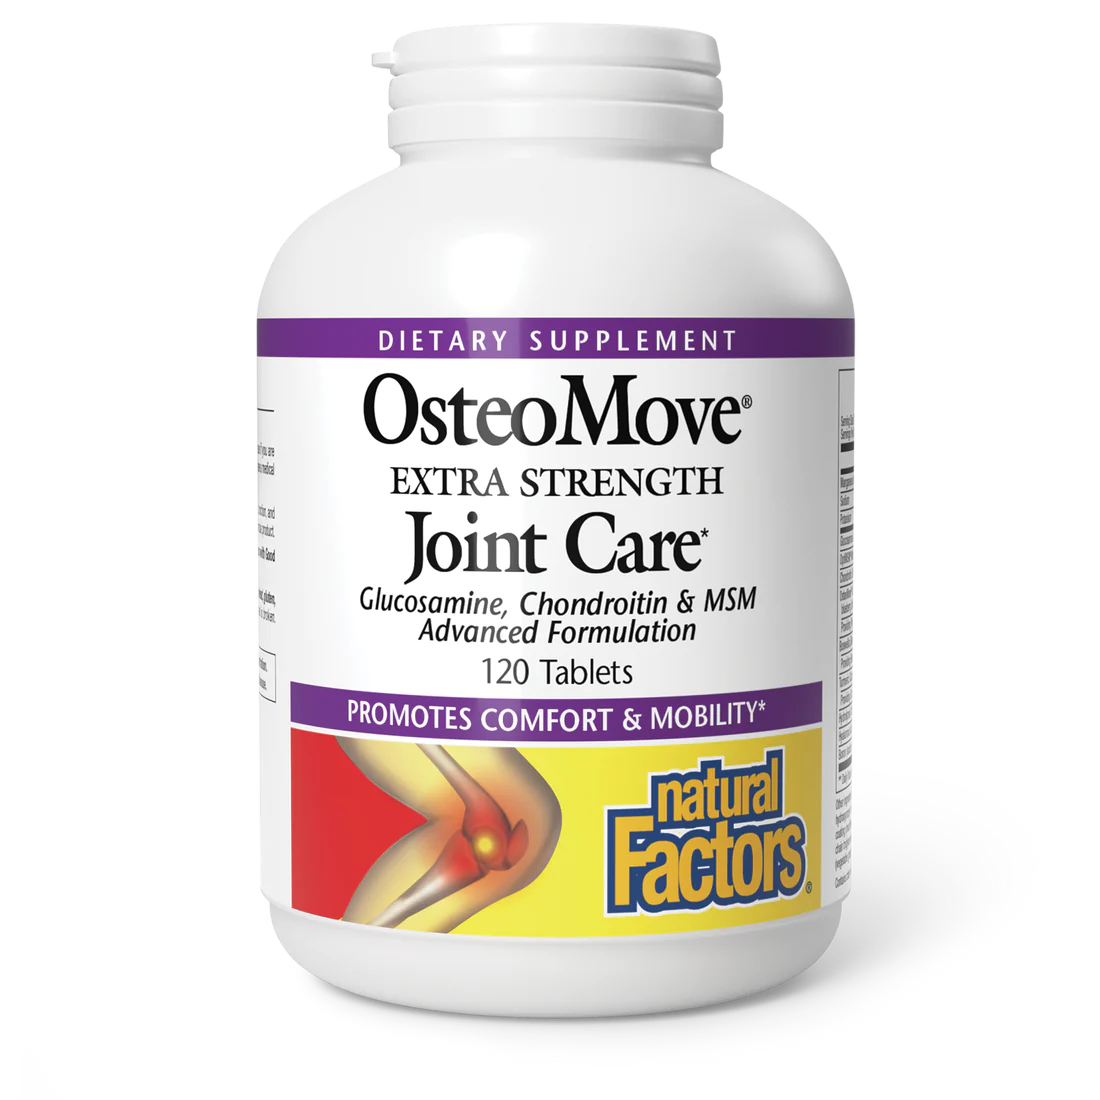 OsteoMove® Extra Strength Joint Care (120 Tablets)